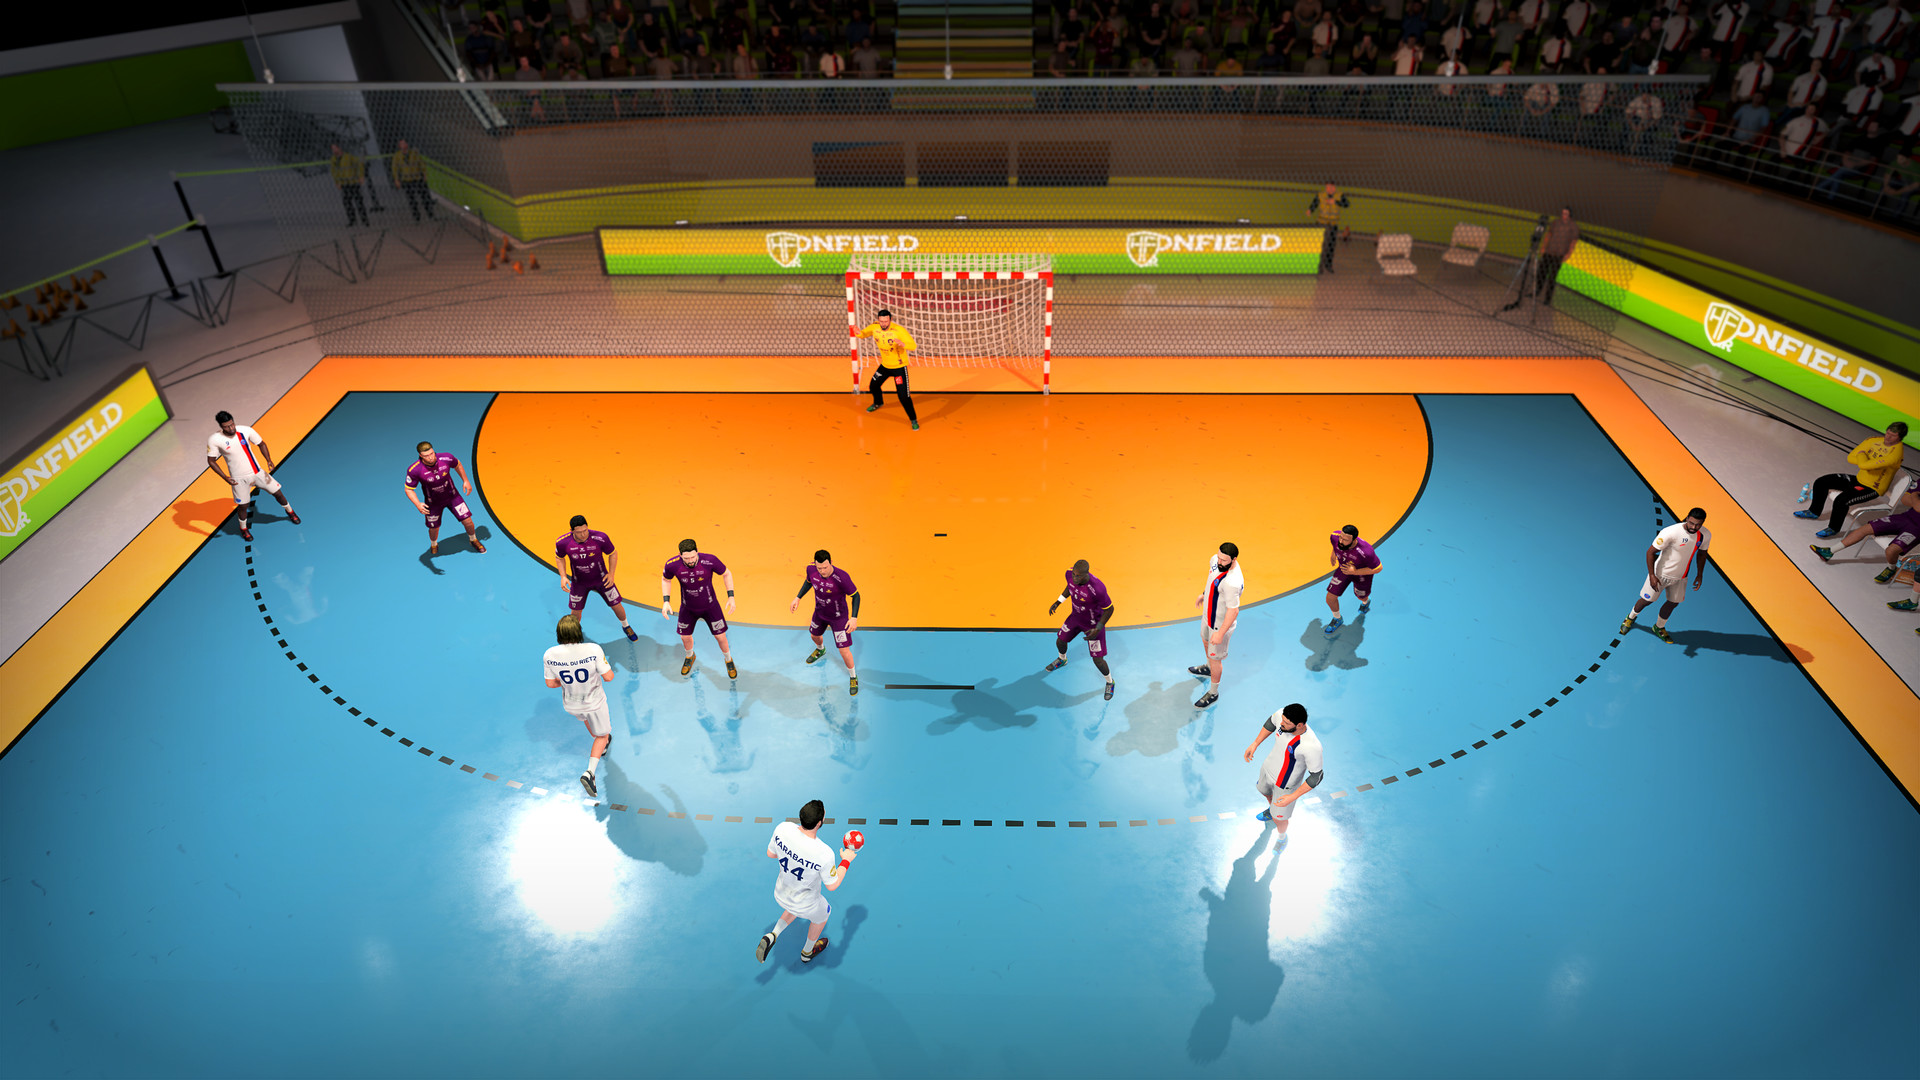 New Games: HANDBALL 21 (PC, PS4, Xbox One) | The Entertainment Factor